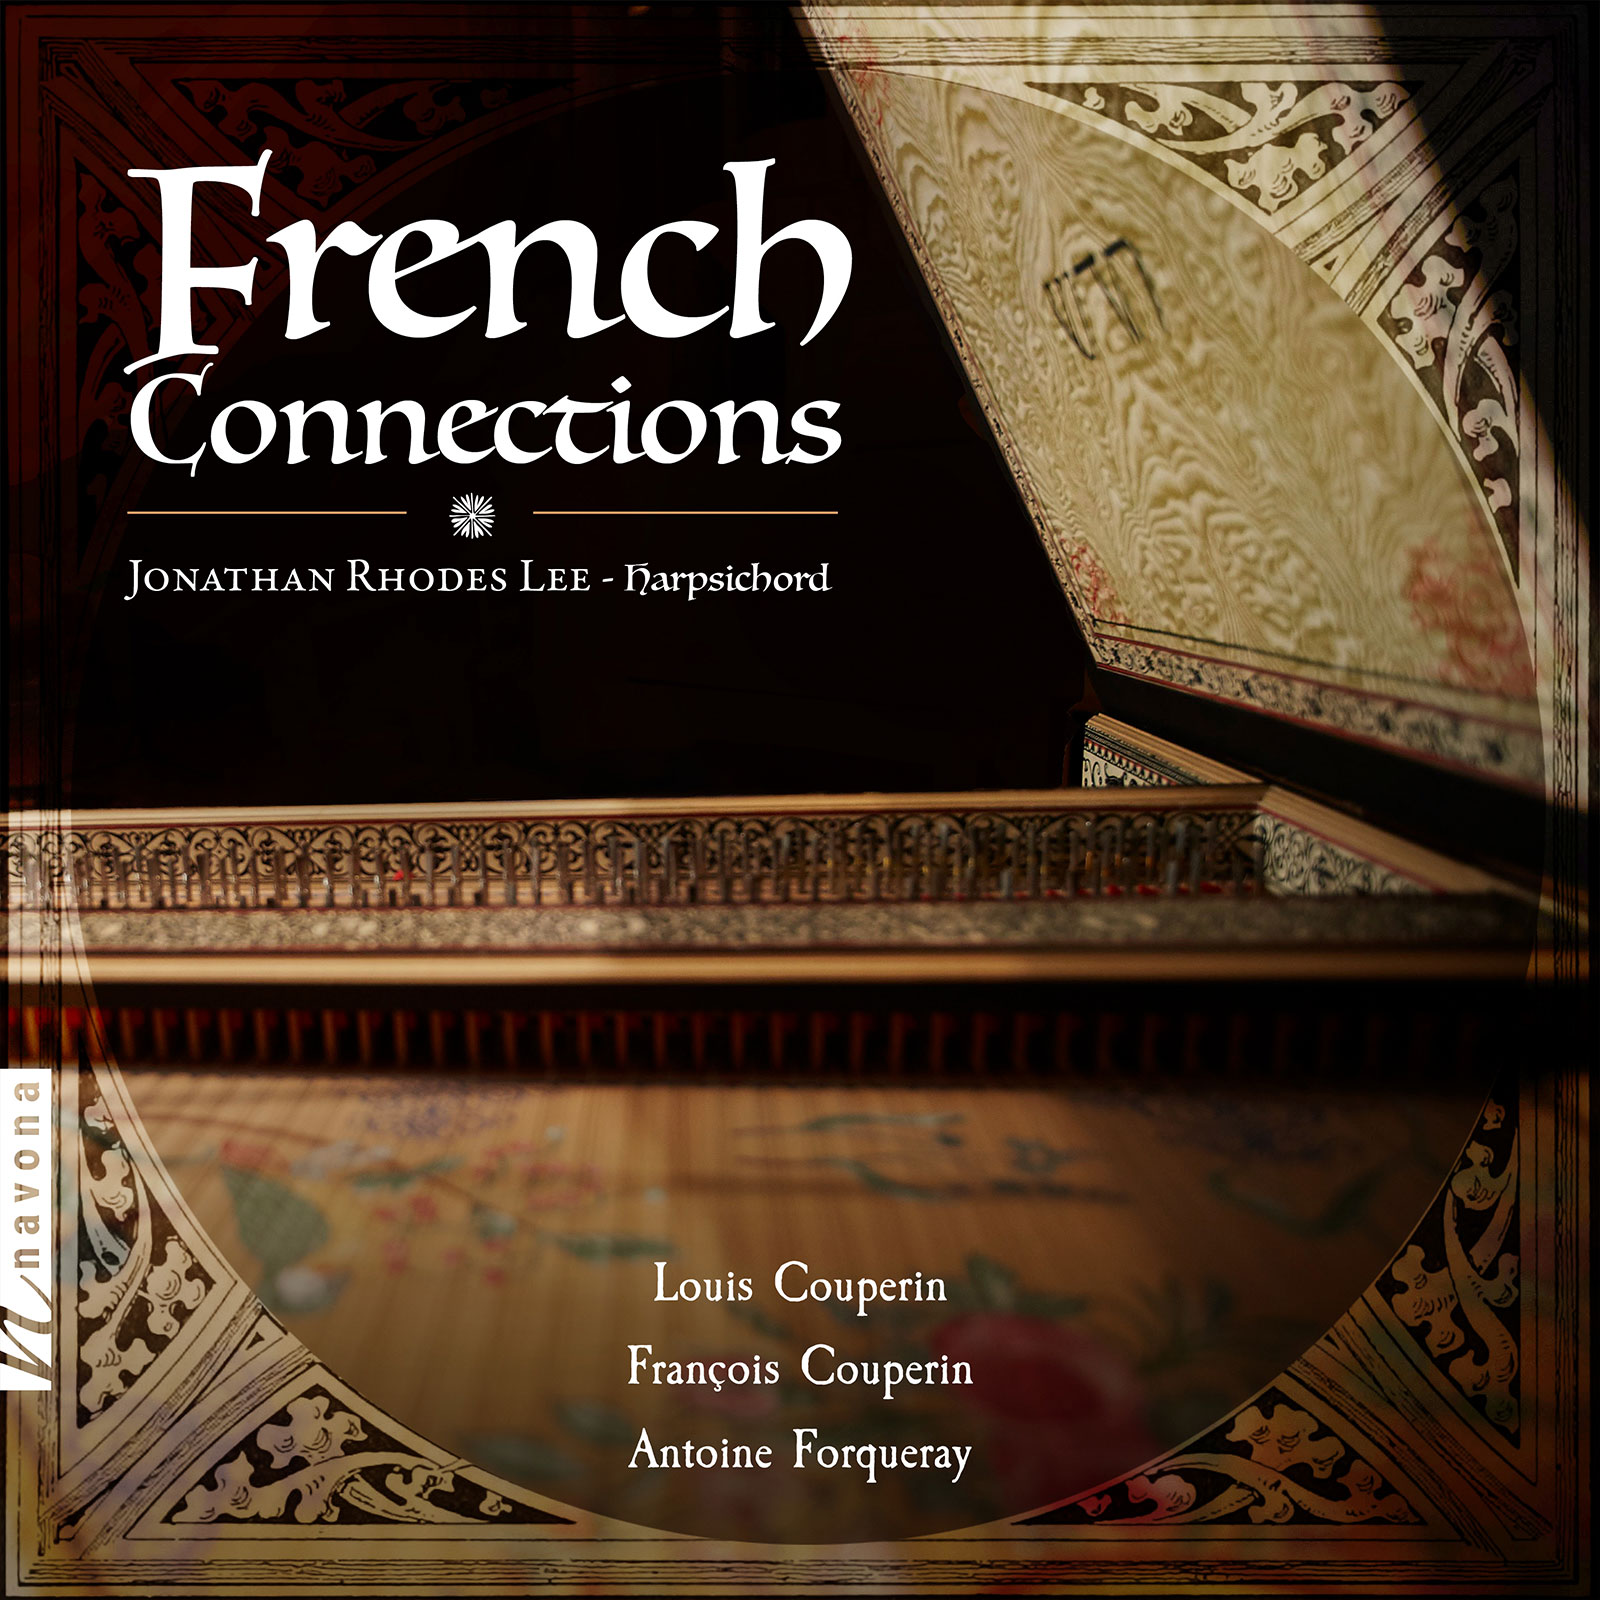 FRENCH CONNECTIONS - Jonathan Rhodes Lee - Album Cover